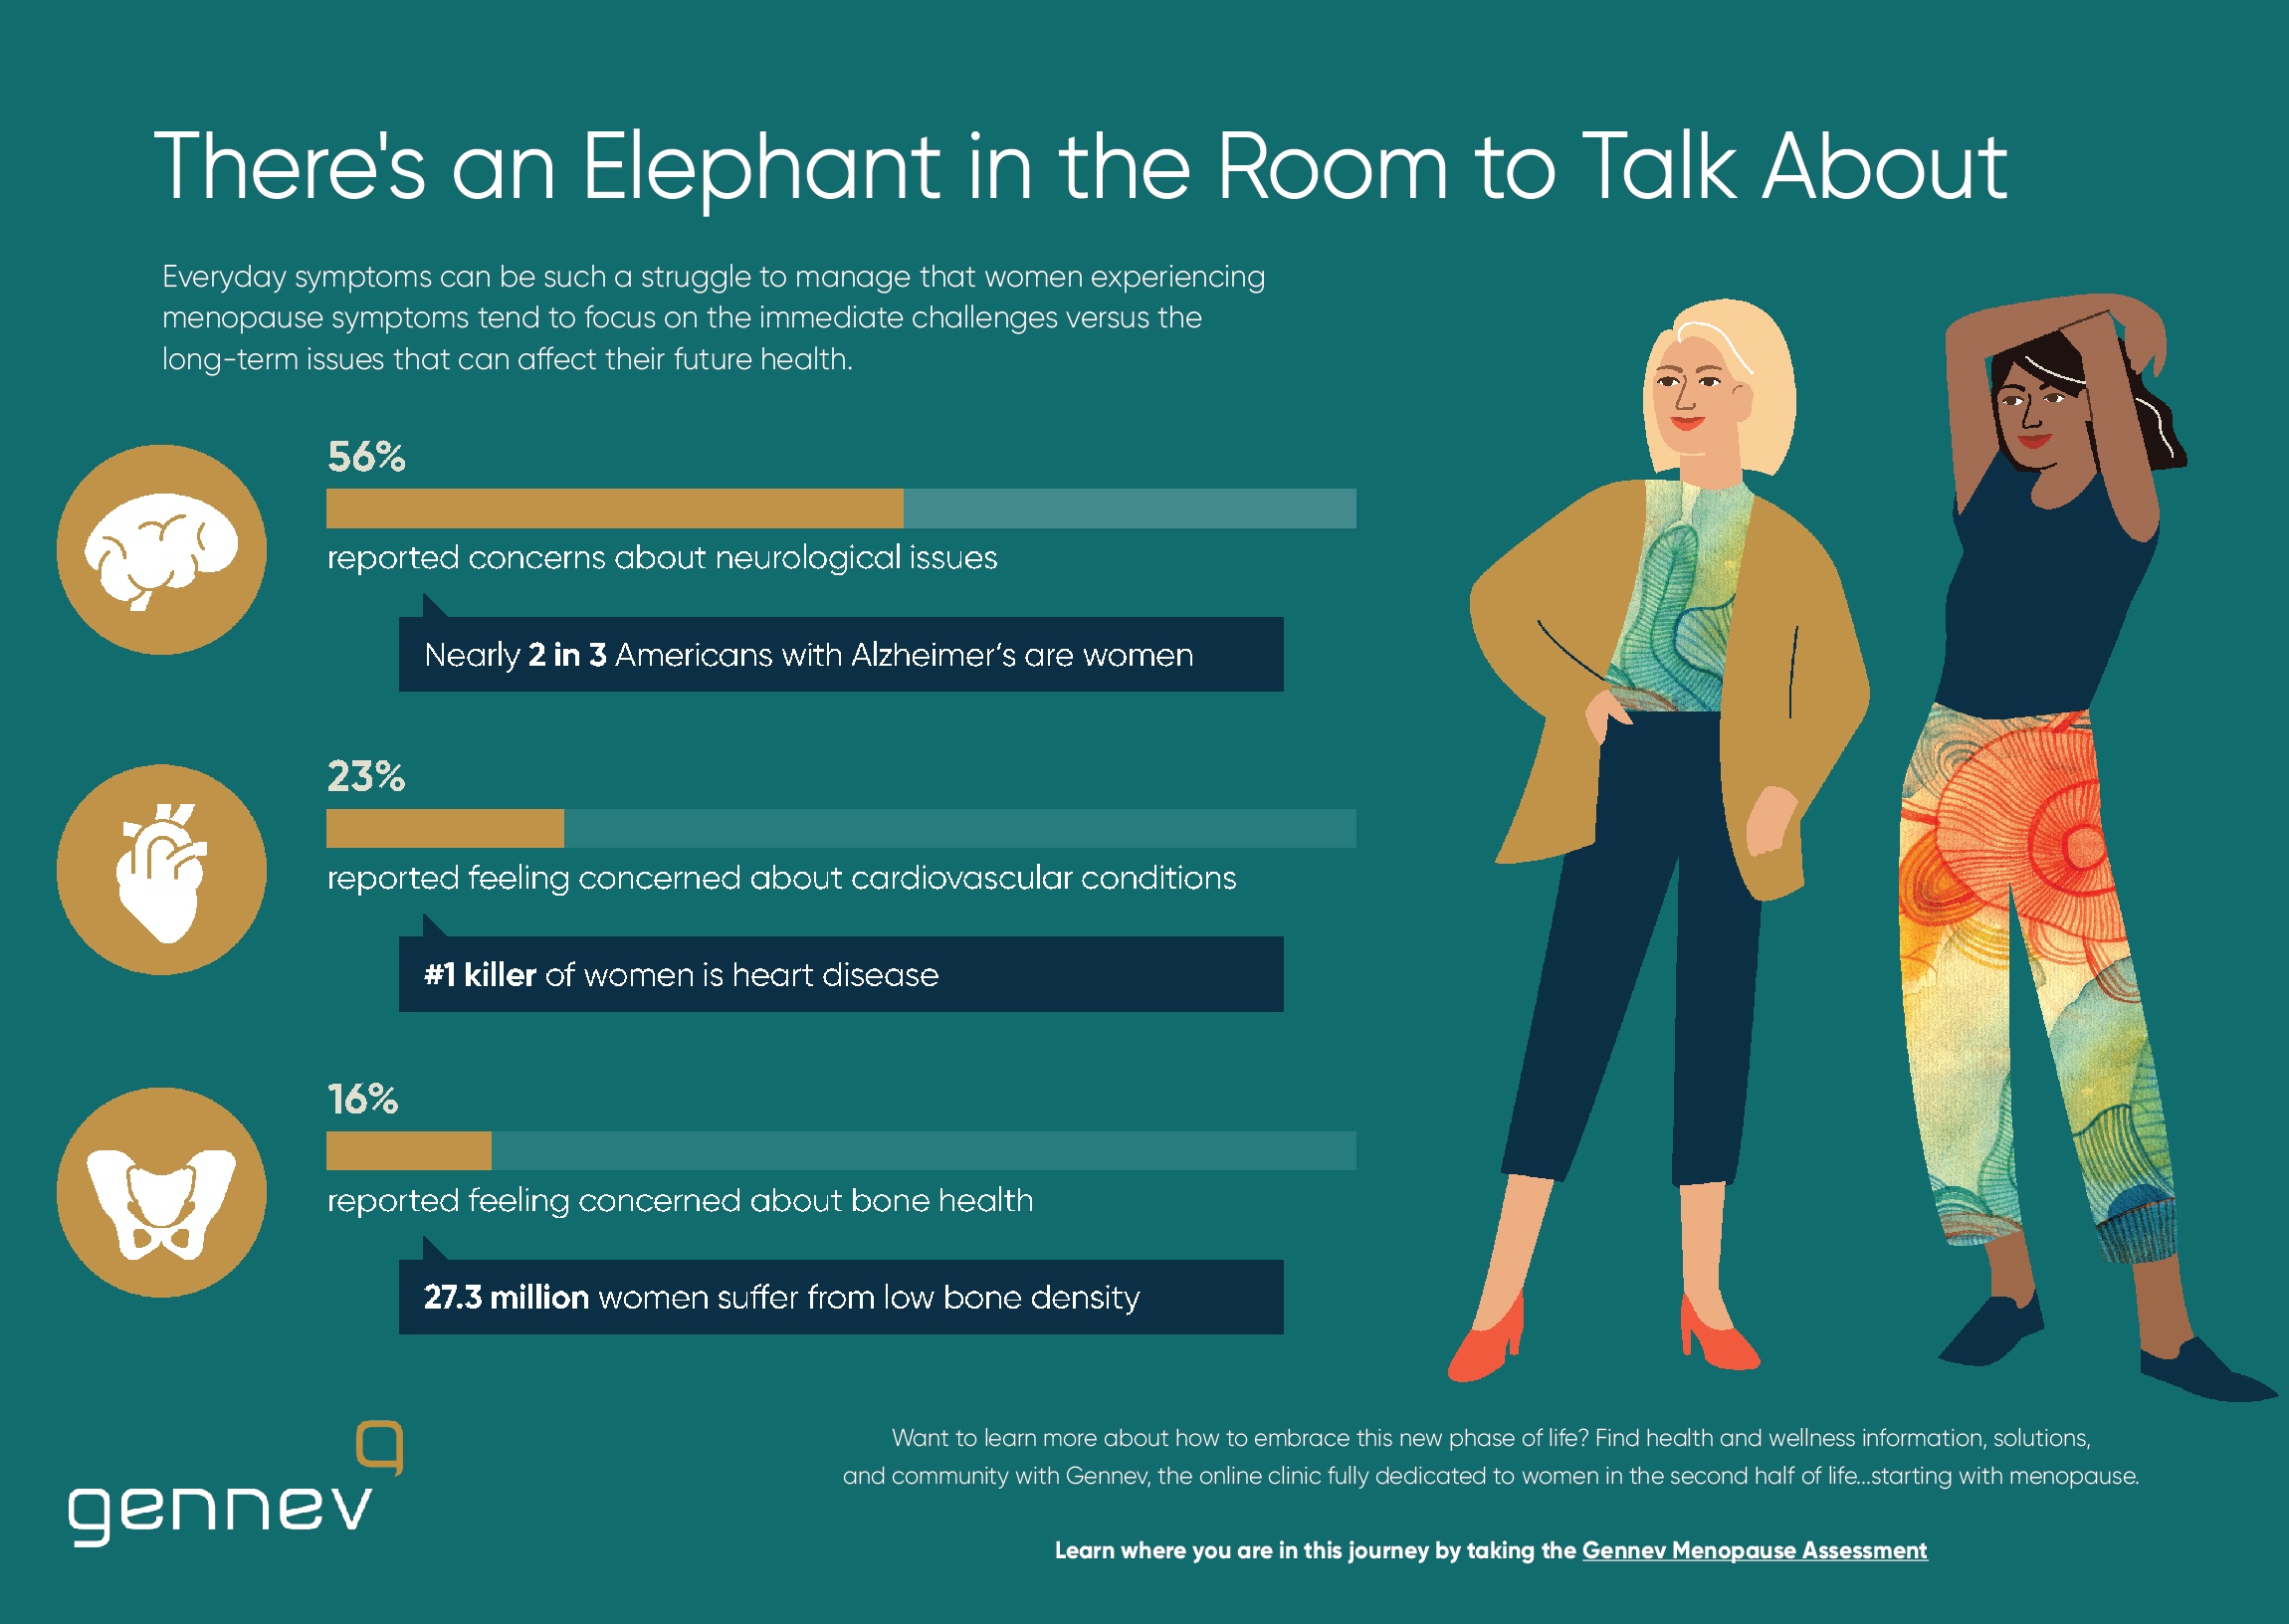 There's an Elephant in the Room to Talk About